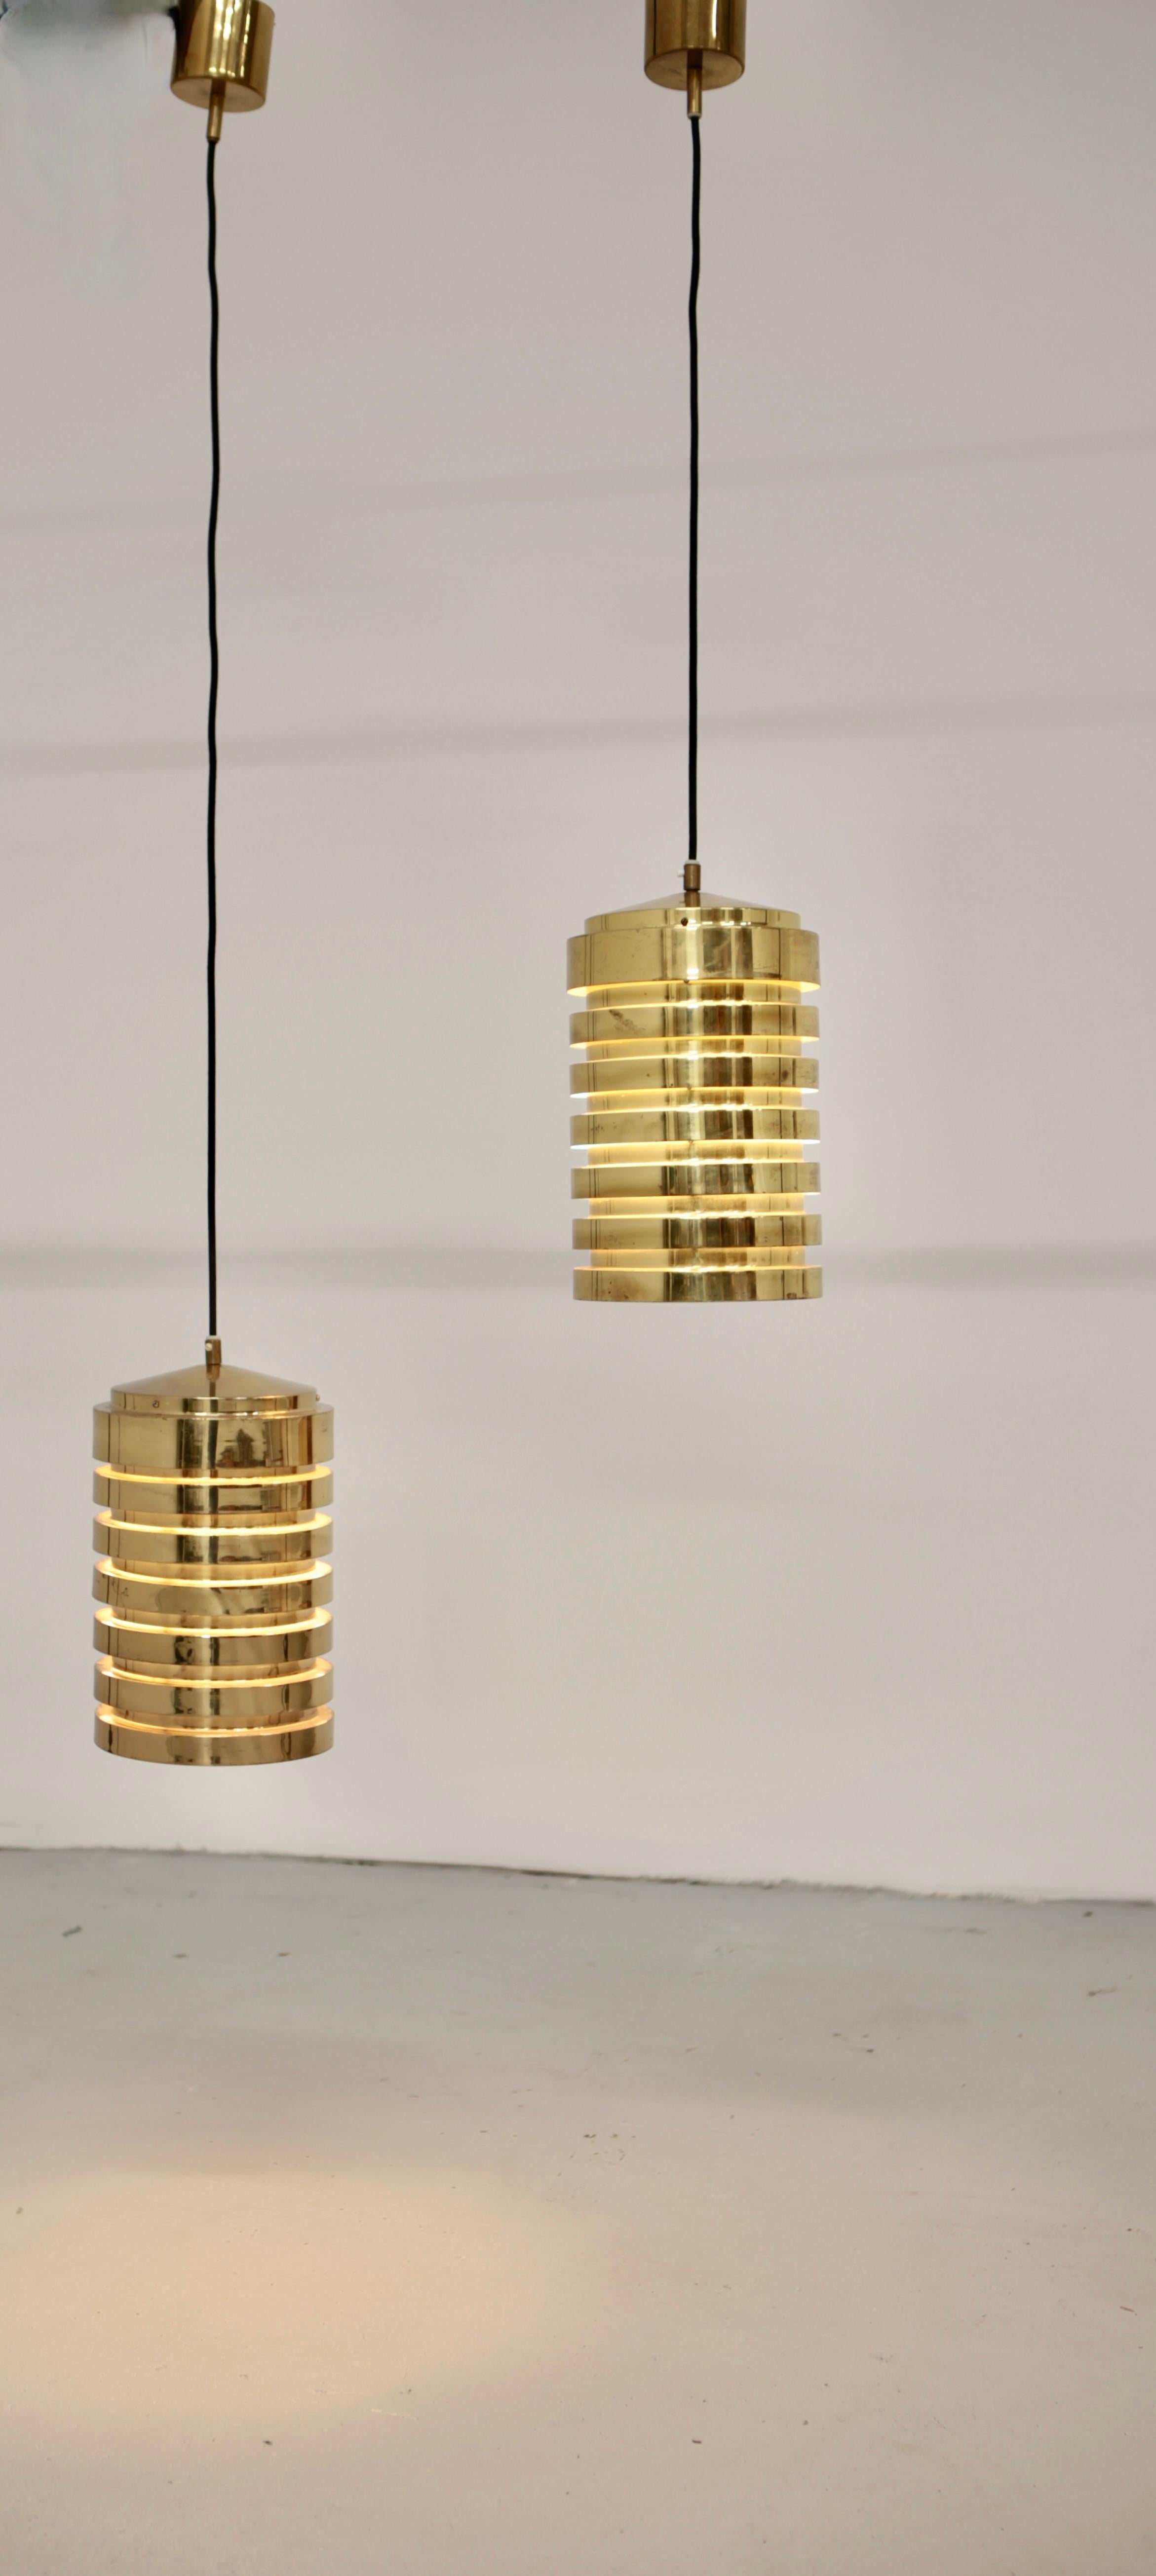 Hans-Agne Jakobsson, Pair of T487 Pendants in Polished Brass, Markaryd, 1960s For Sale 2